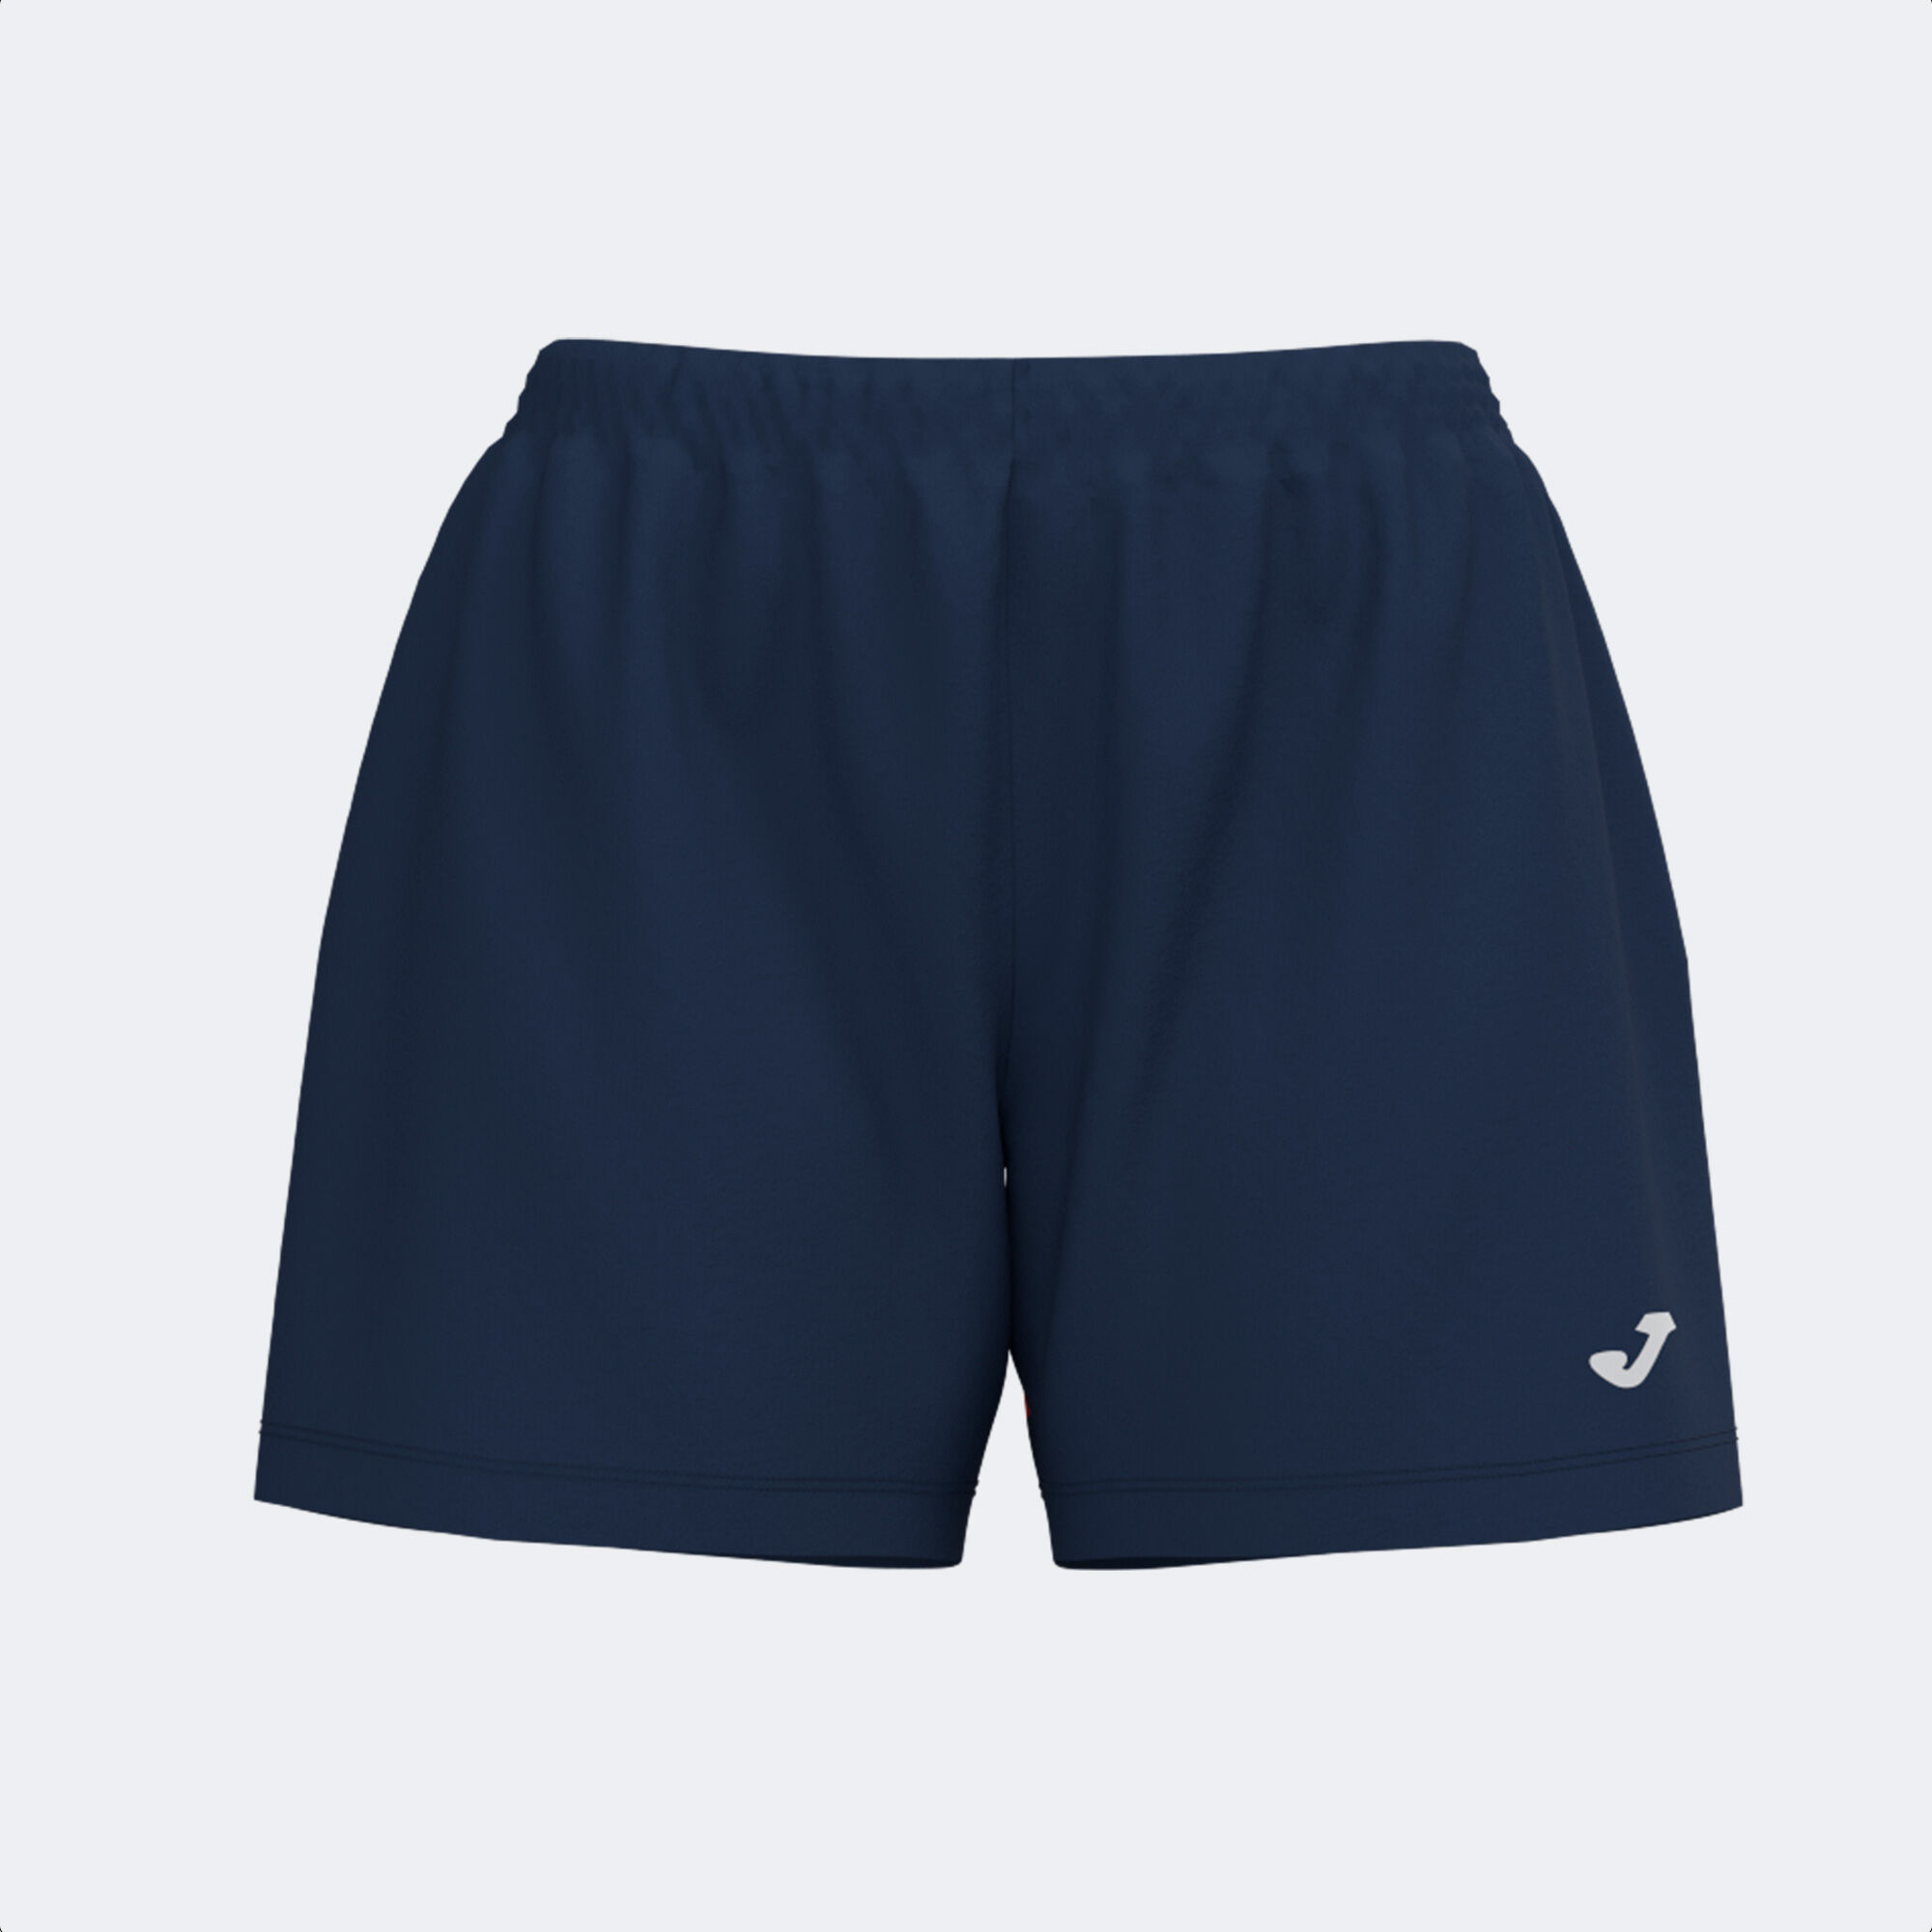 Shorts woman Tokyo navy blue red